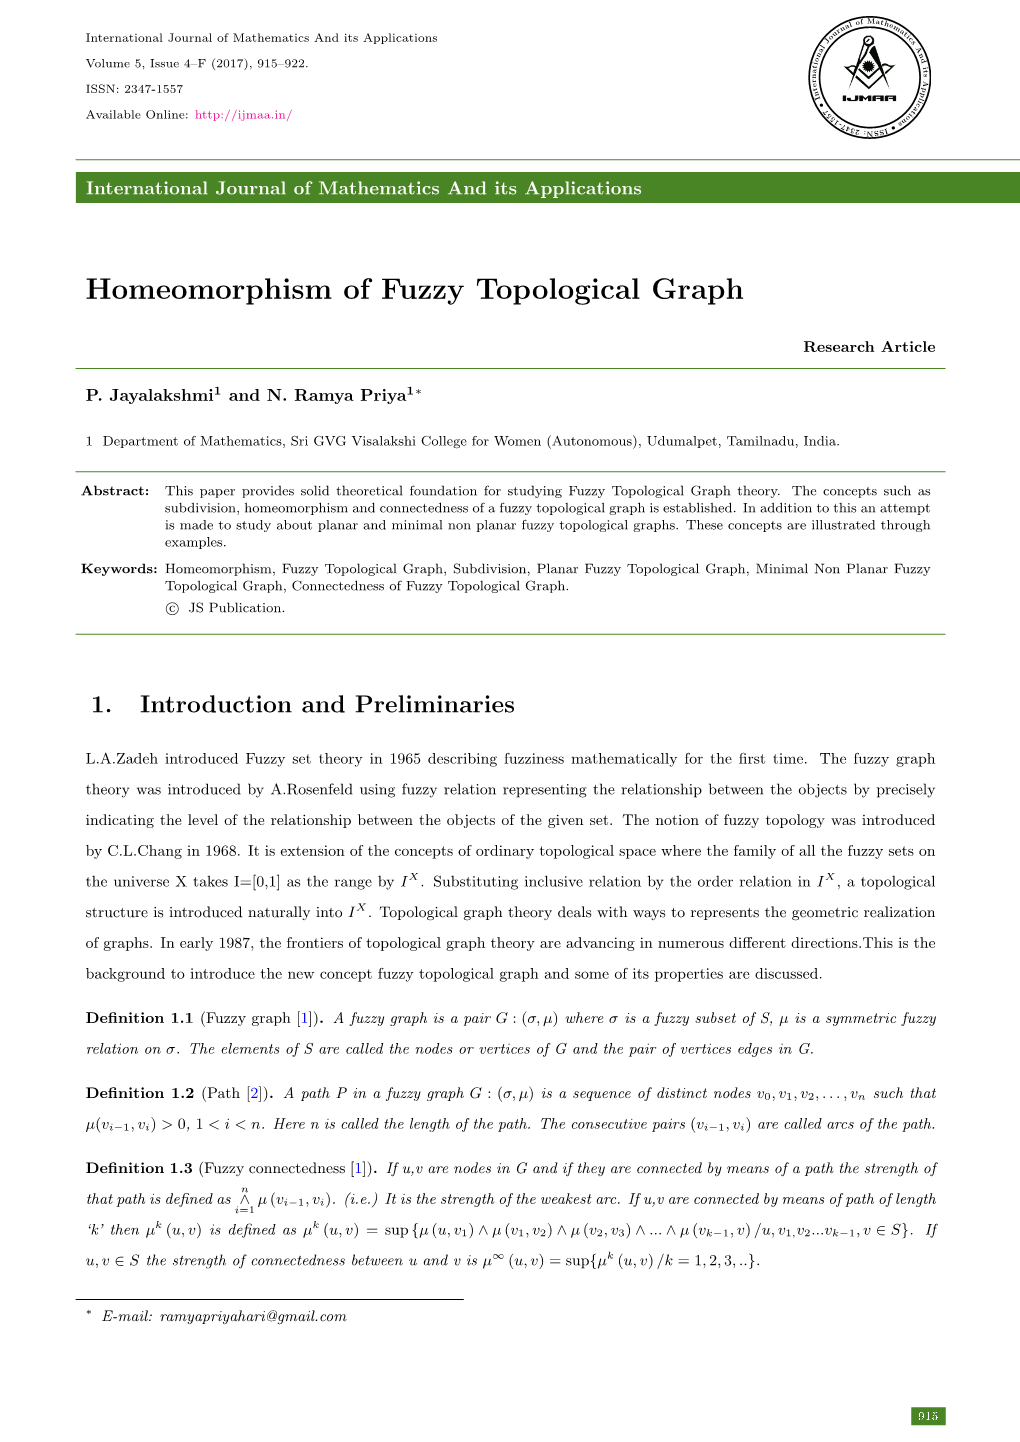 Homeomorphism of Fuzzy Topological Graph